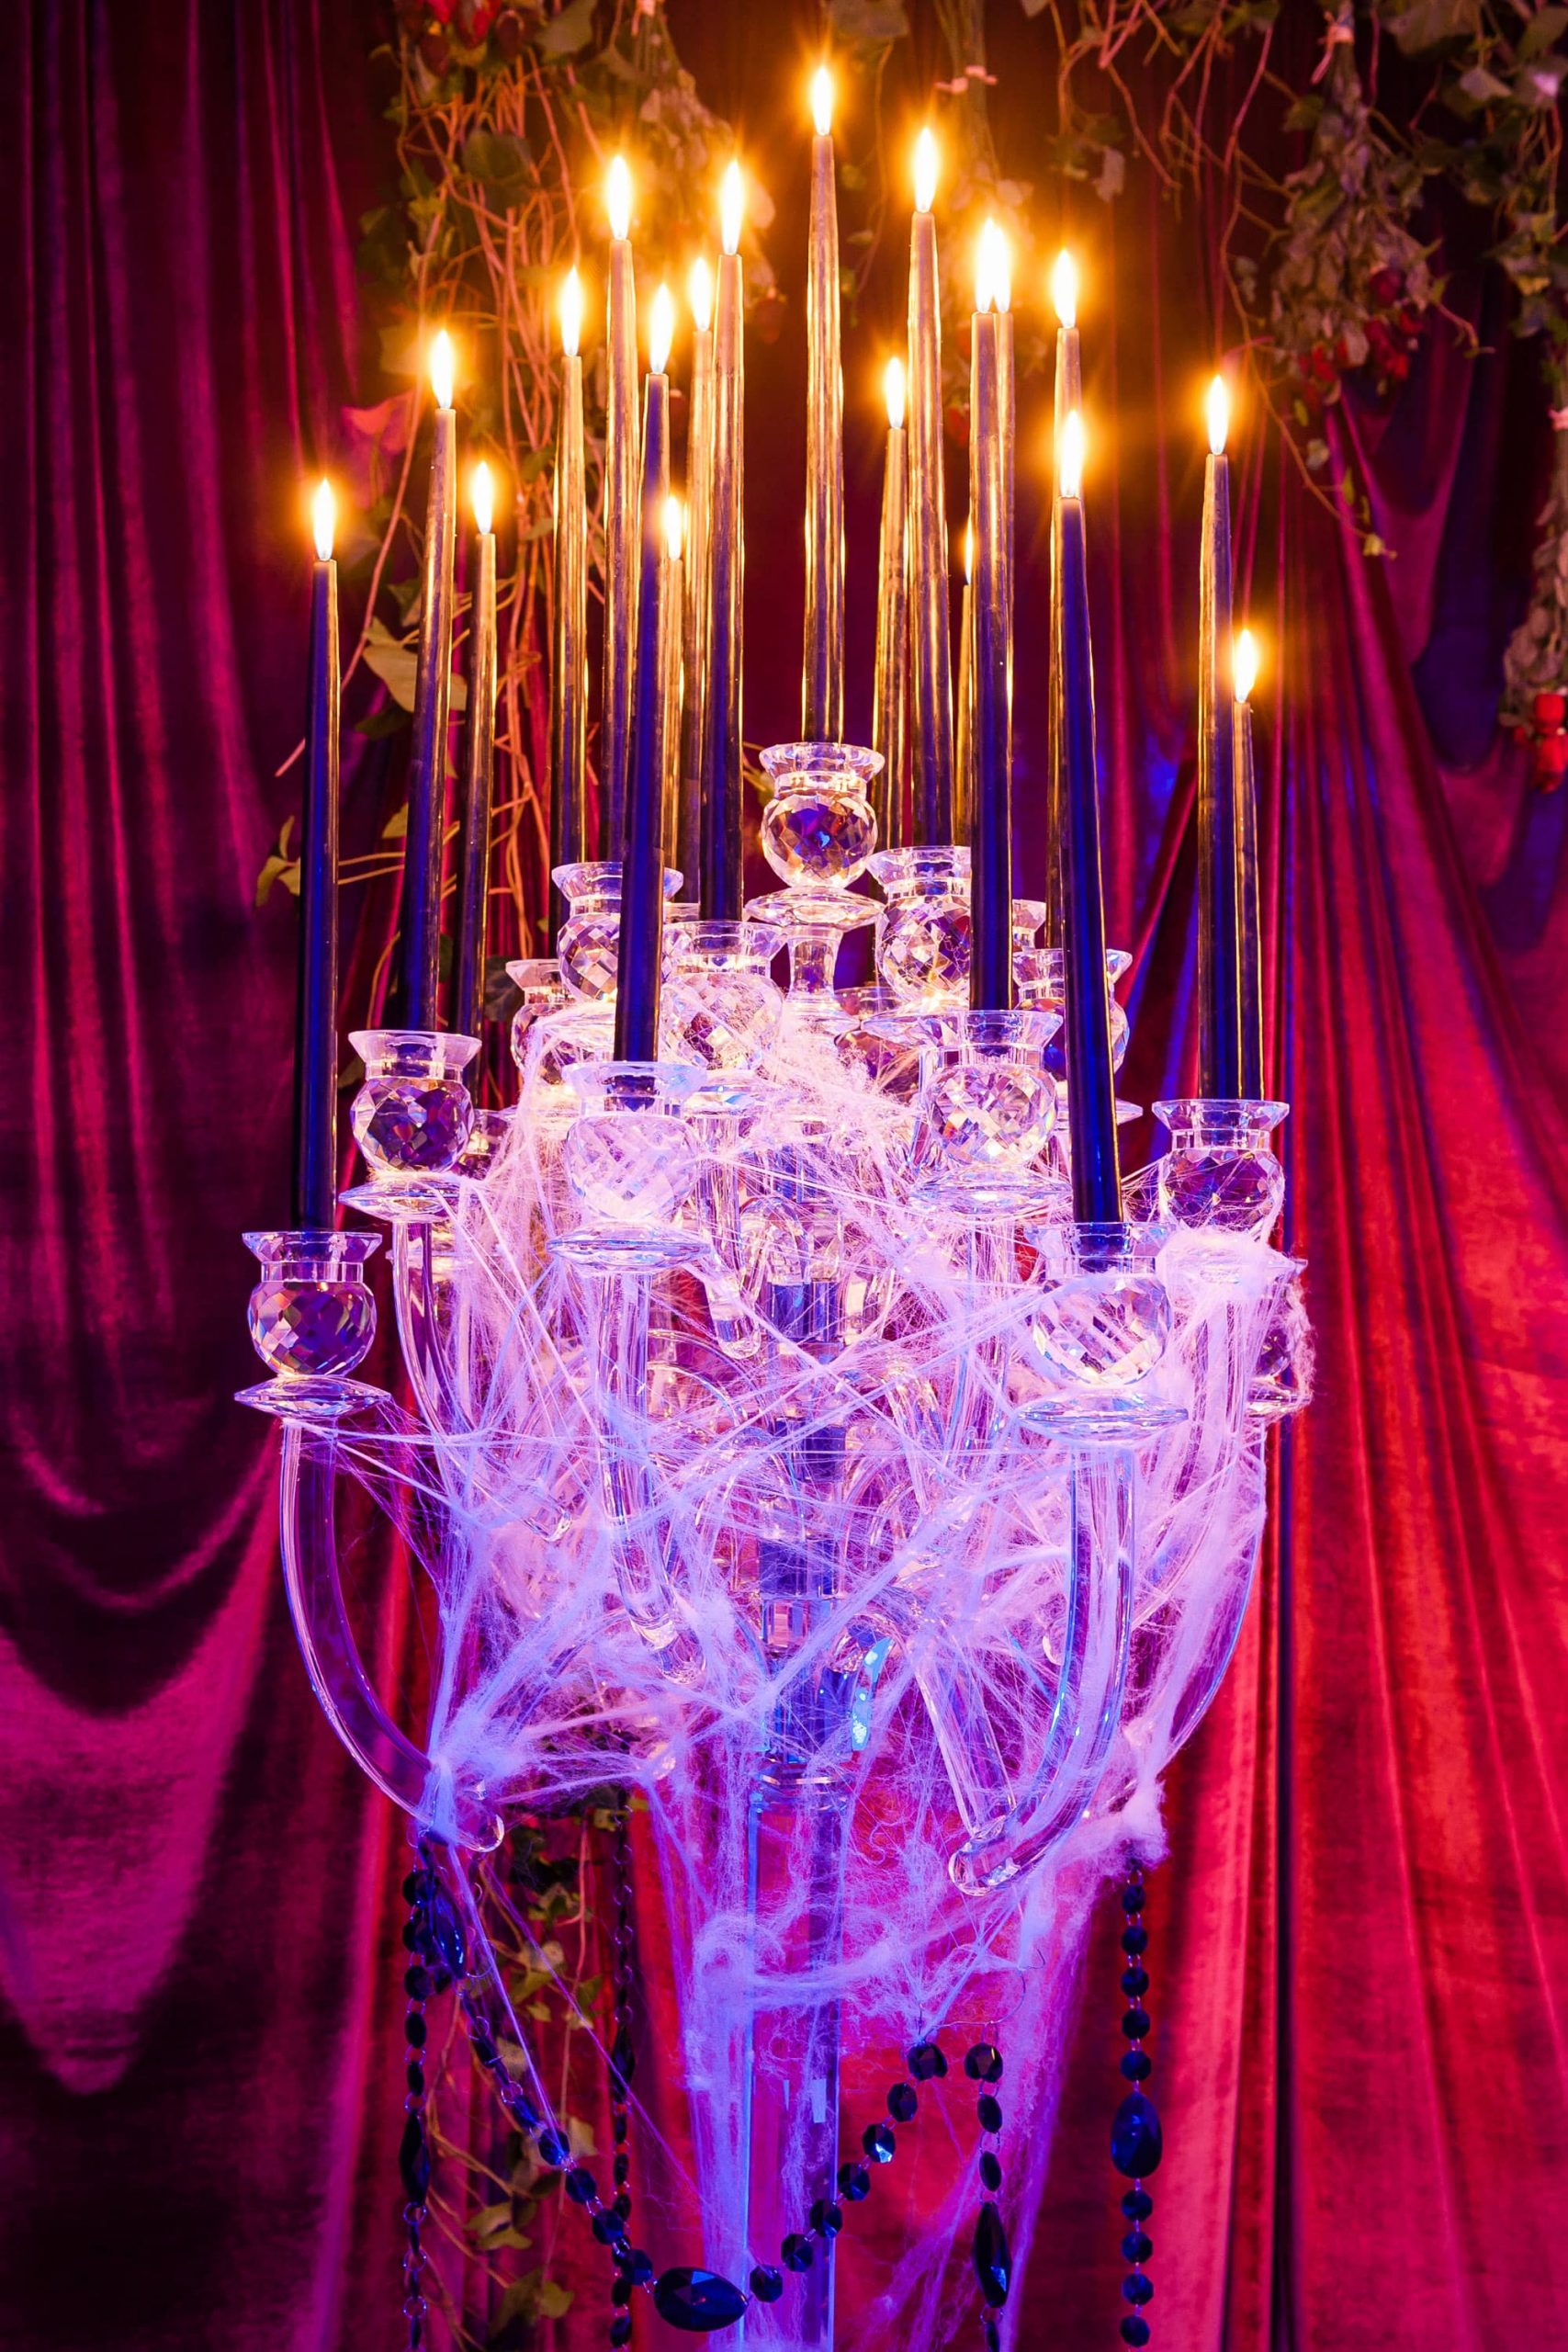 Cobweb candle display at this epic halloween party at The Standard in NYC | Photo by Gruber Photographers